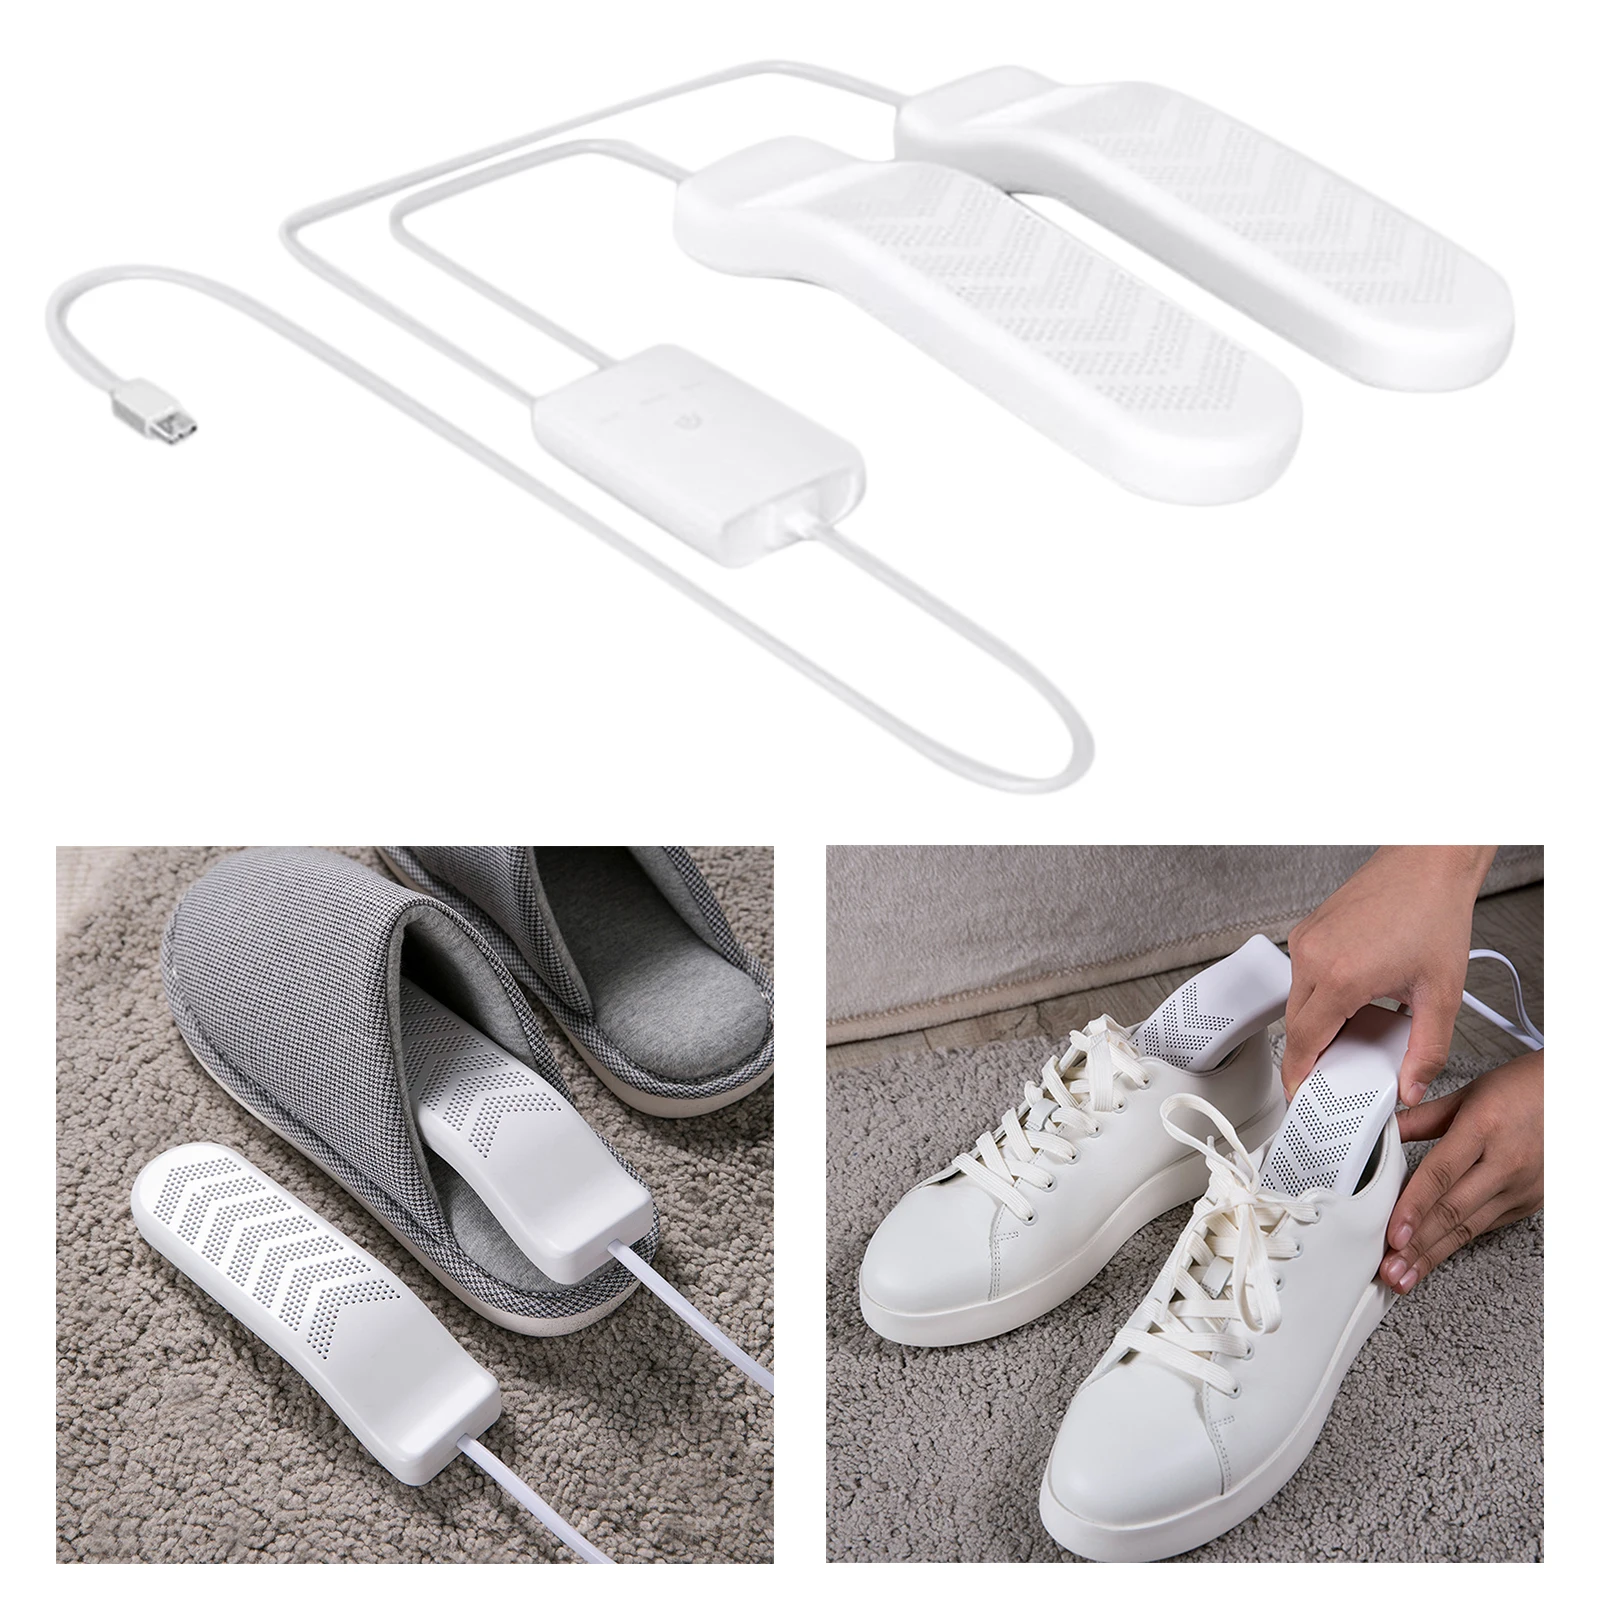 Portable Household USB Electric Boot Dryer Shoe Dryer Foot Dryer Timing Disinfection 5V